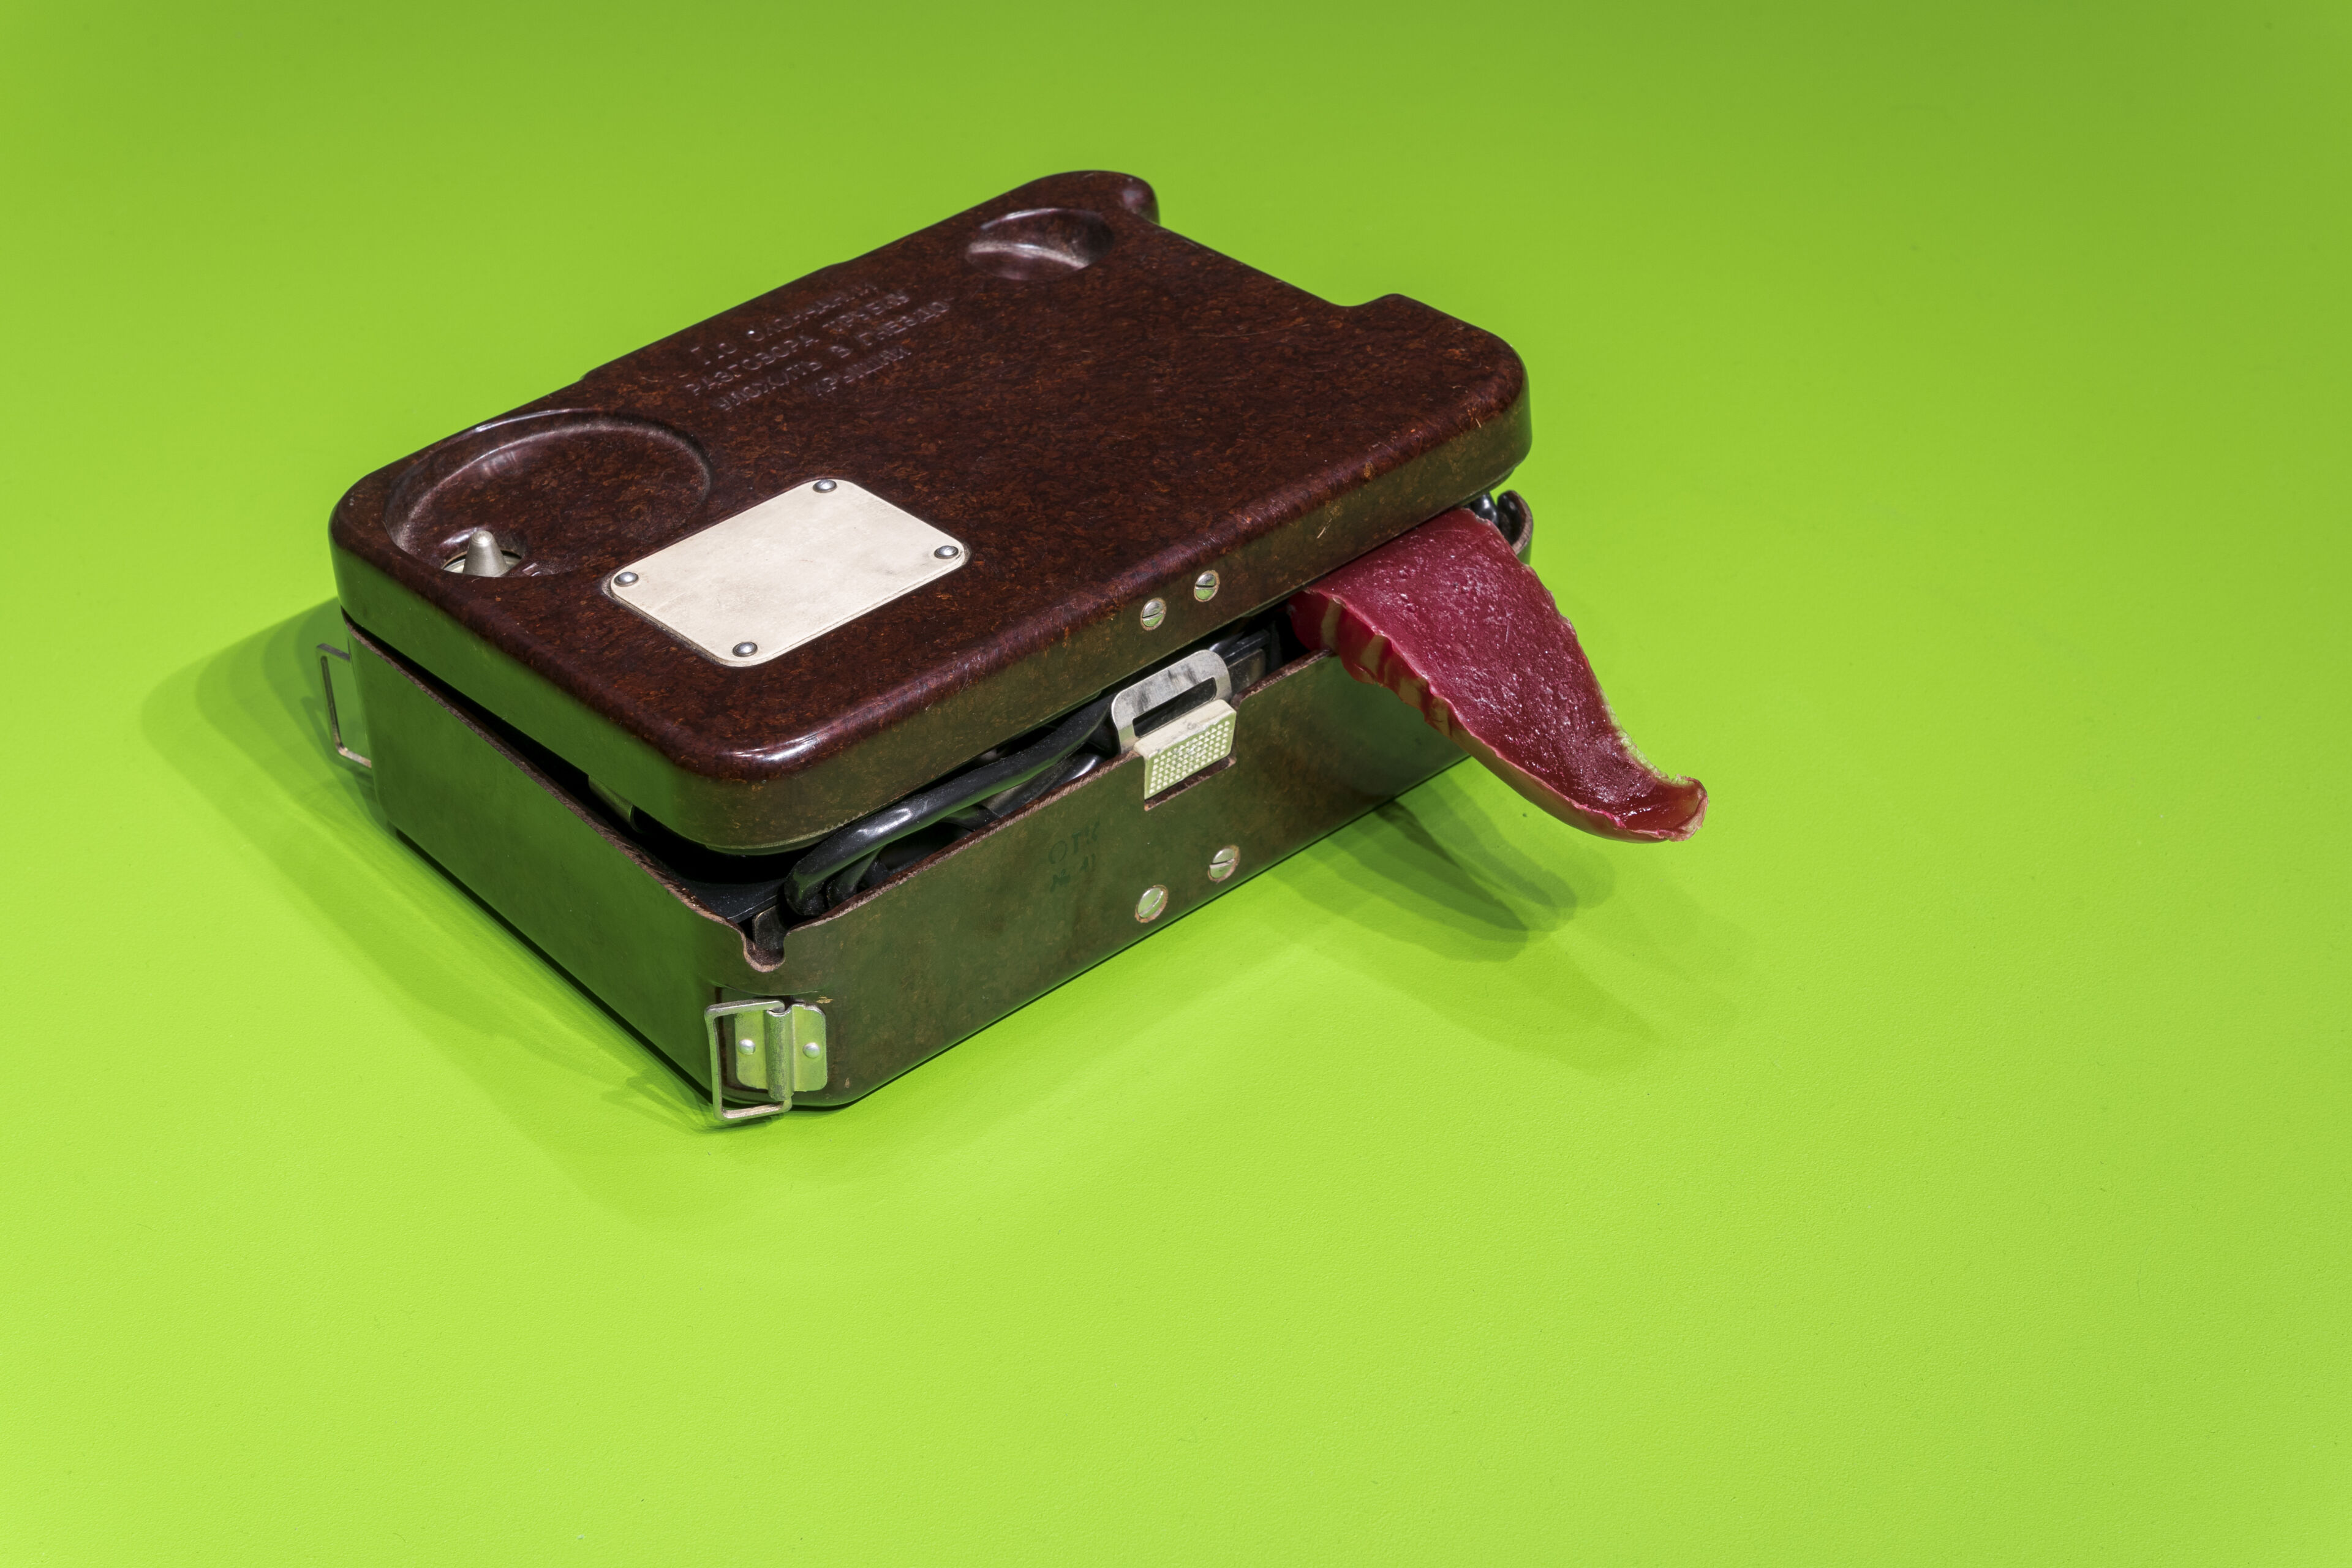 An old suitcase on a green background with a tongue-shaped object sticking out and cables visible inside.